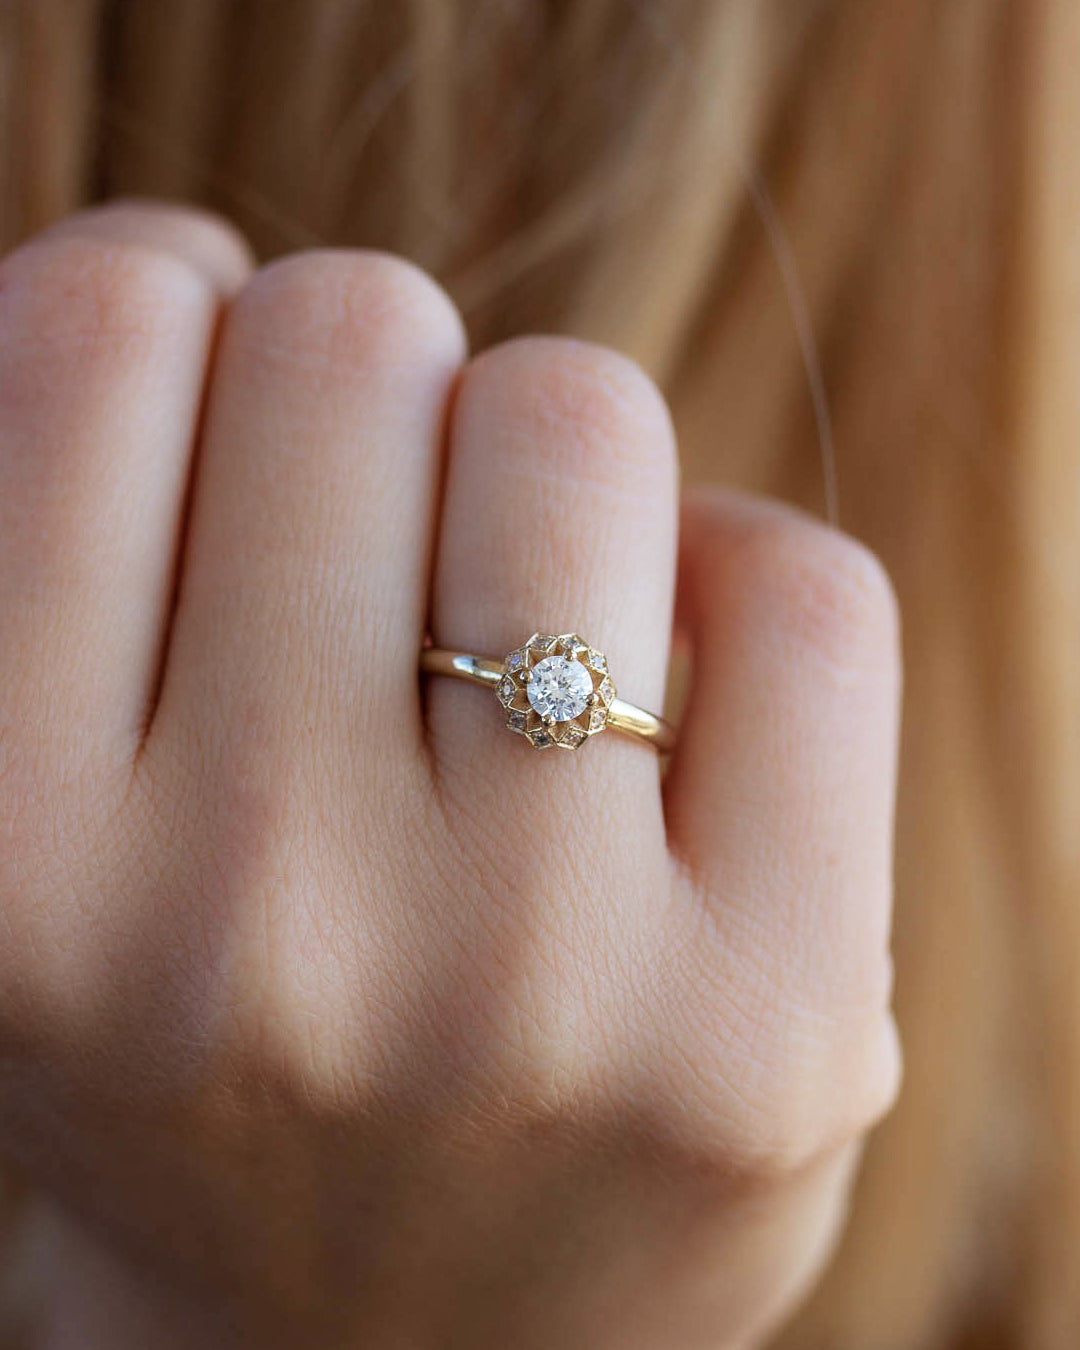 A delicate 14k yellow gold engagement ring, set with a center brilliant cut white diamond and smaller diamonds around it, in the shape of a geometric flower. 